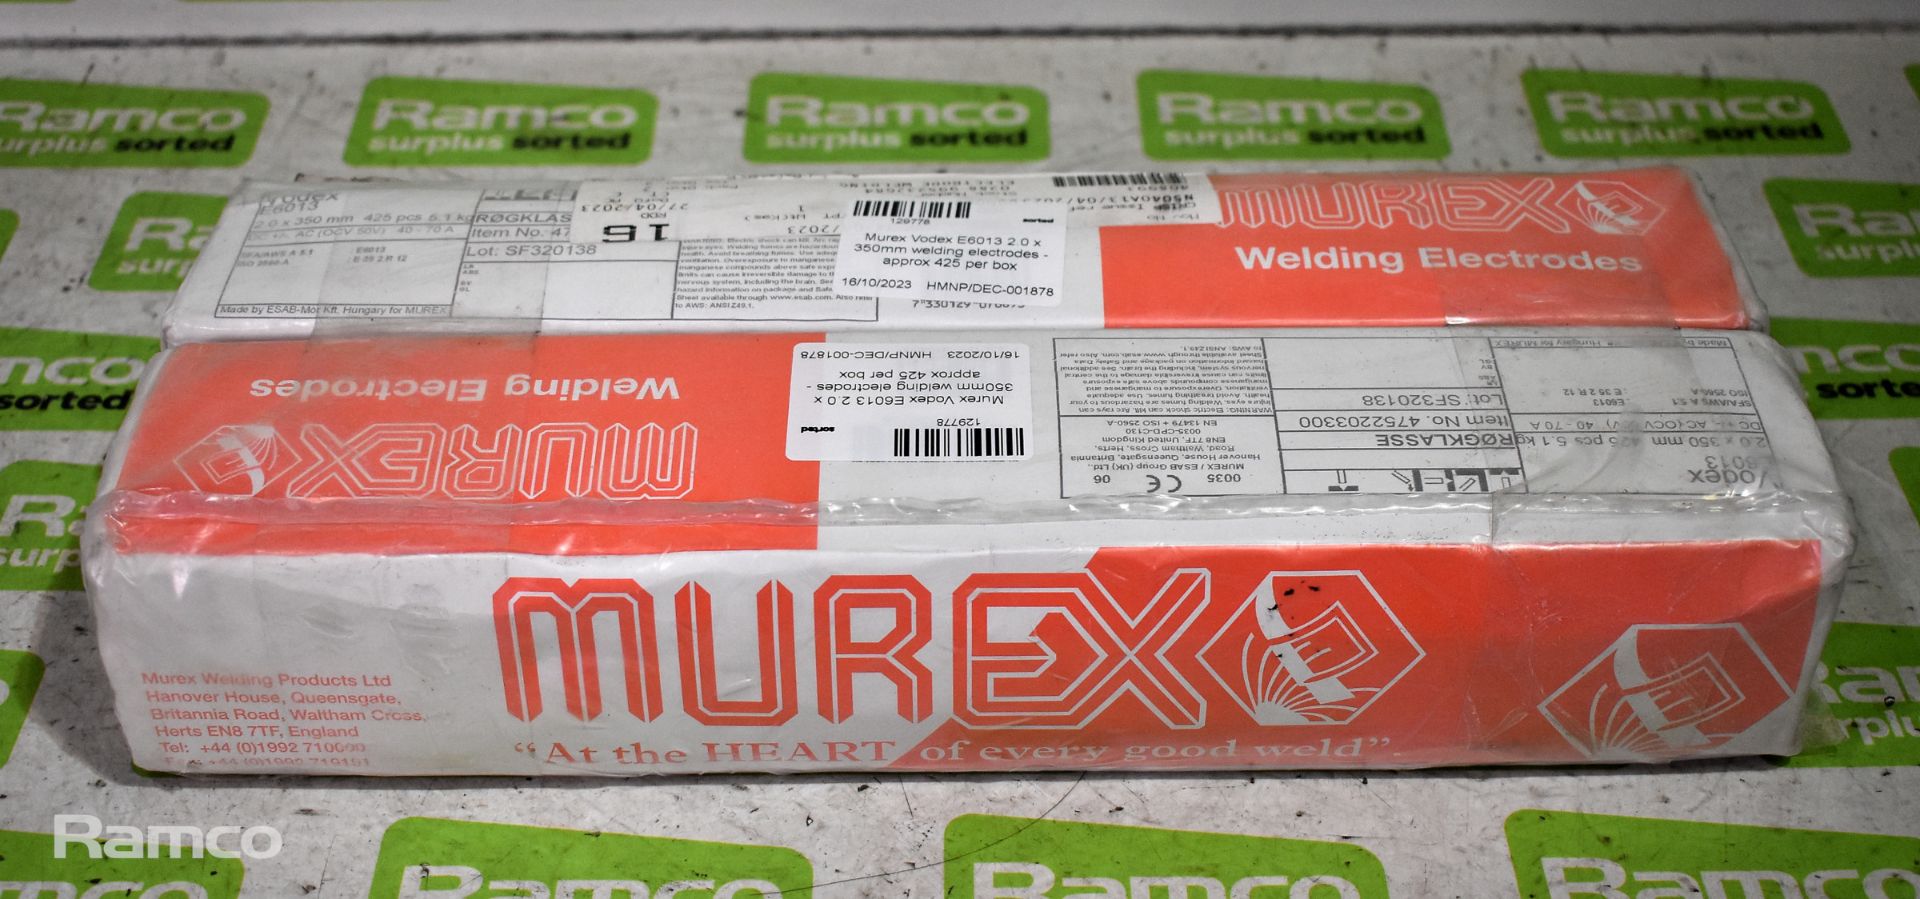 2x packs of Murex Vodex E6013 2.0 x 350mm welding electrodes - approx 400 per box - Image 3 of 3